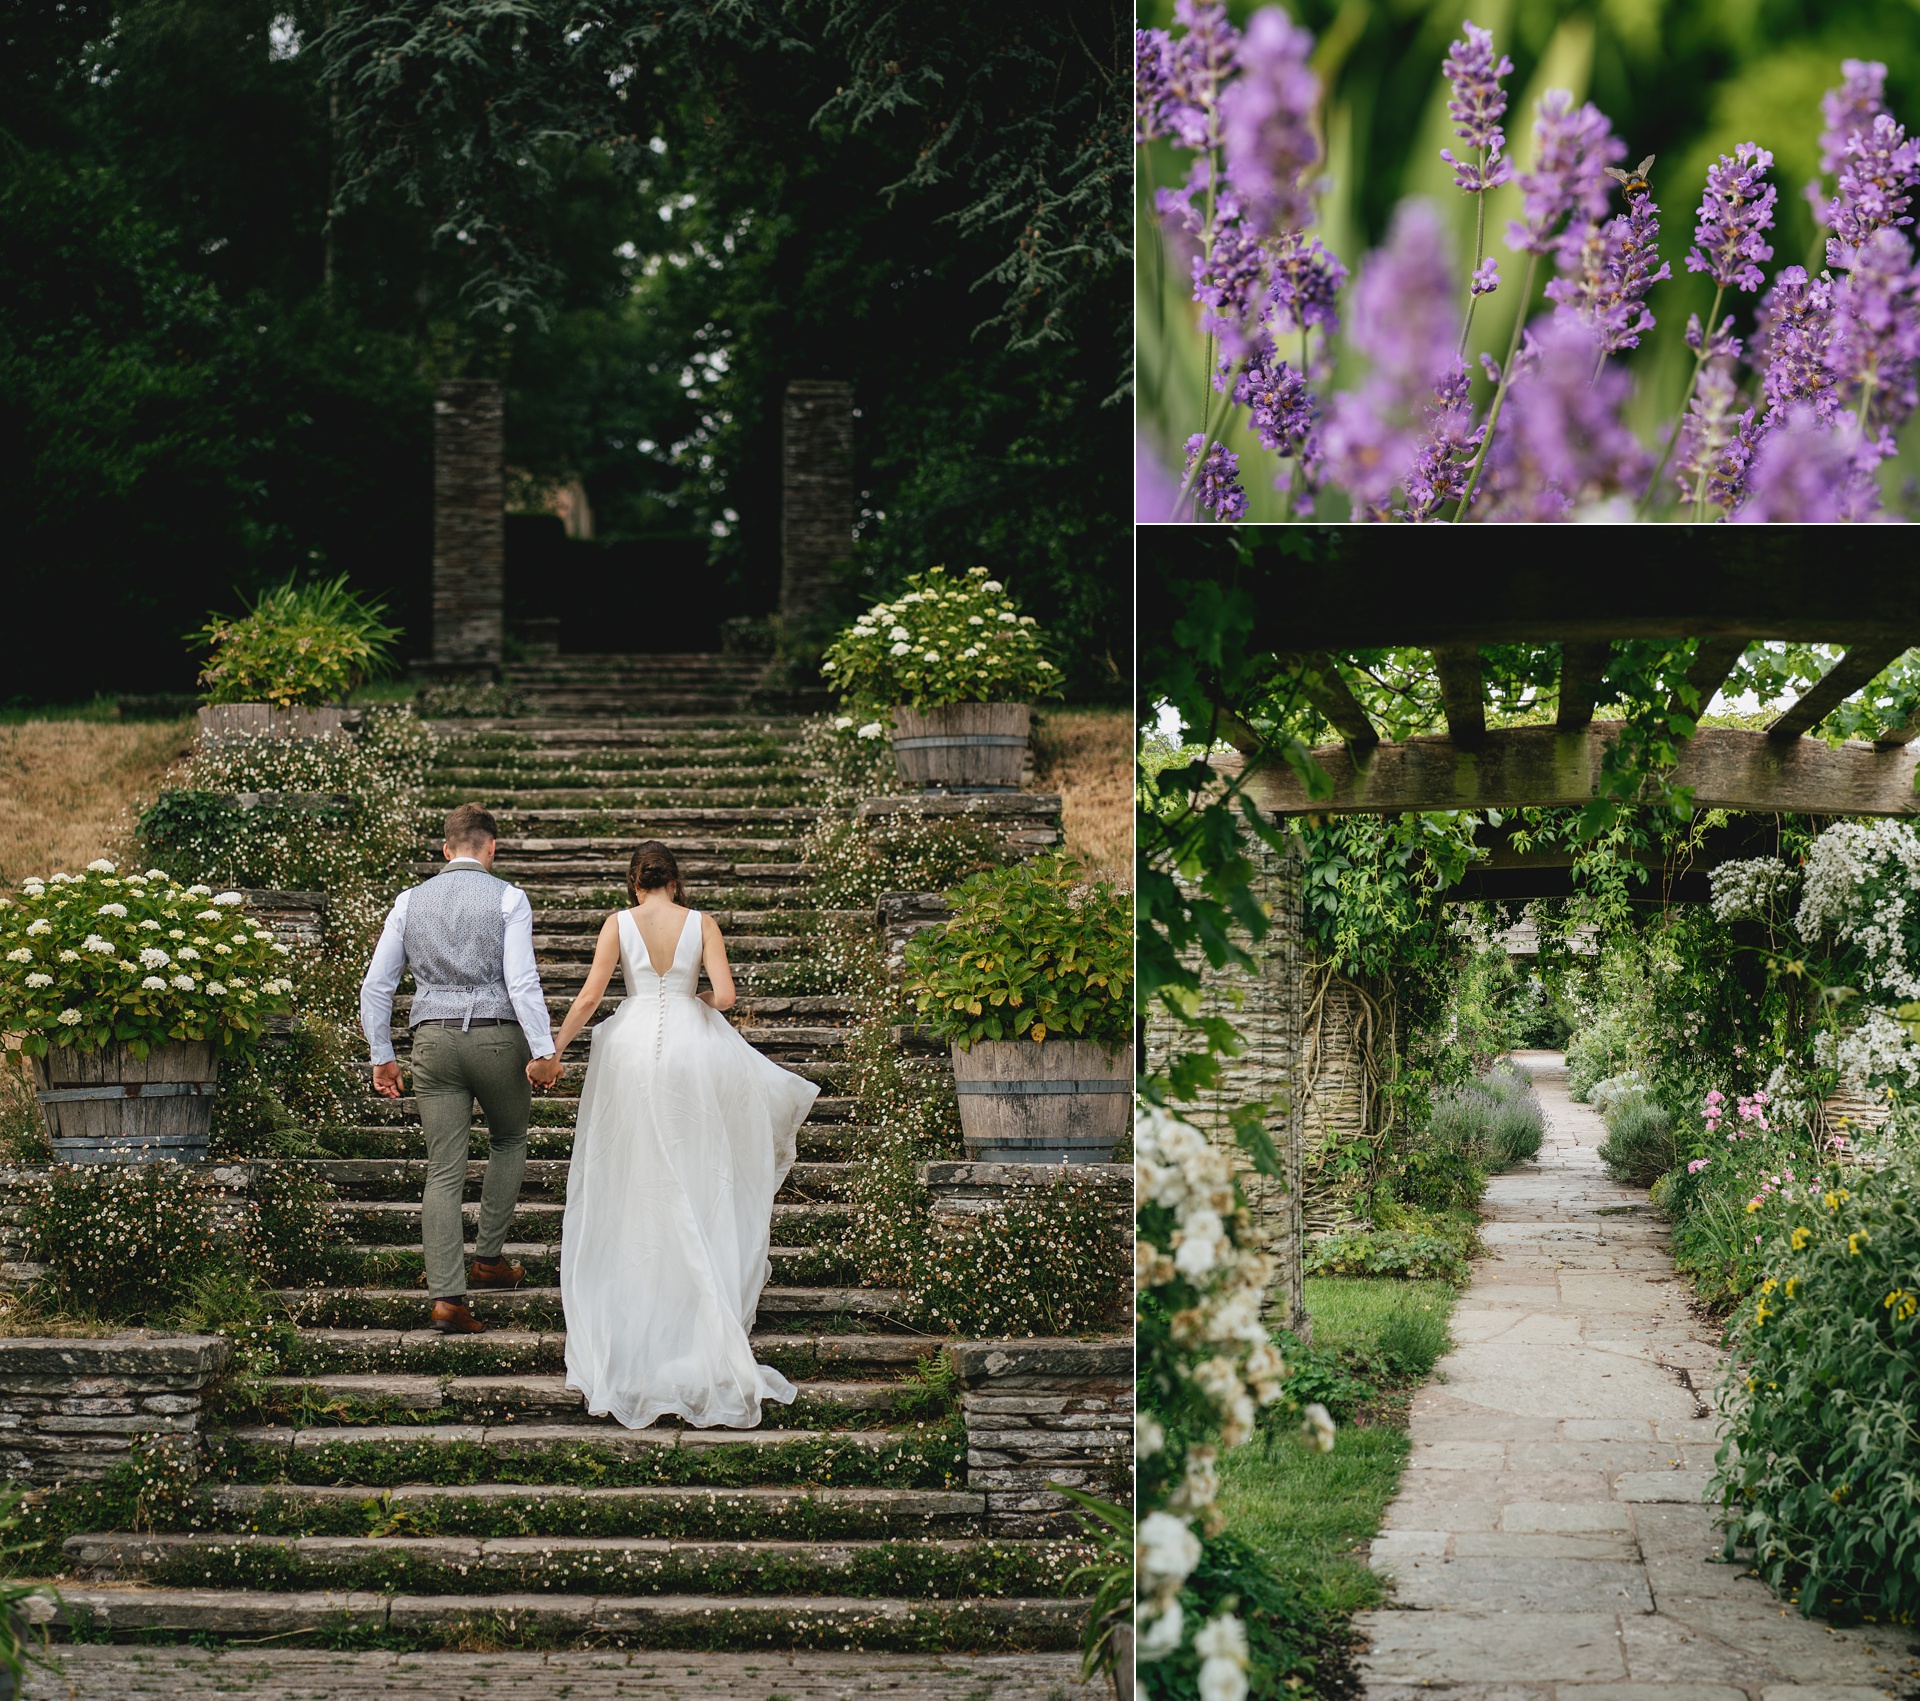 A bride and groom walking up stone steps at Hestercombe Gardens